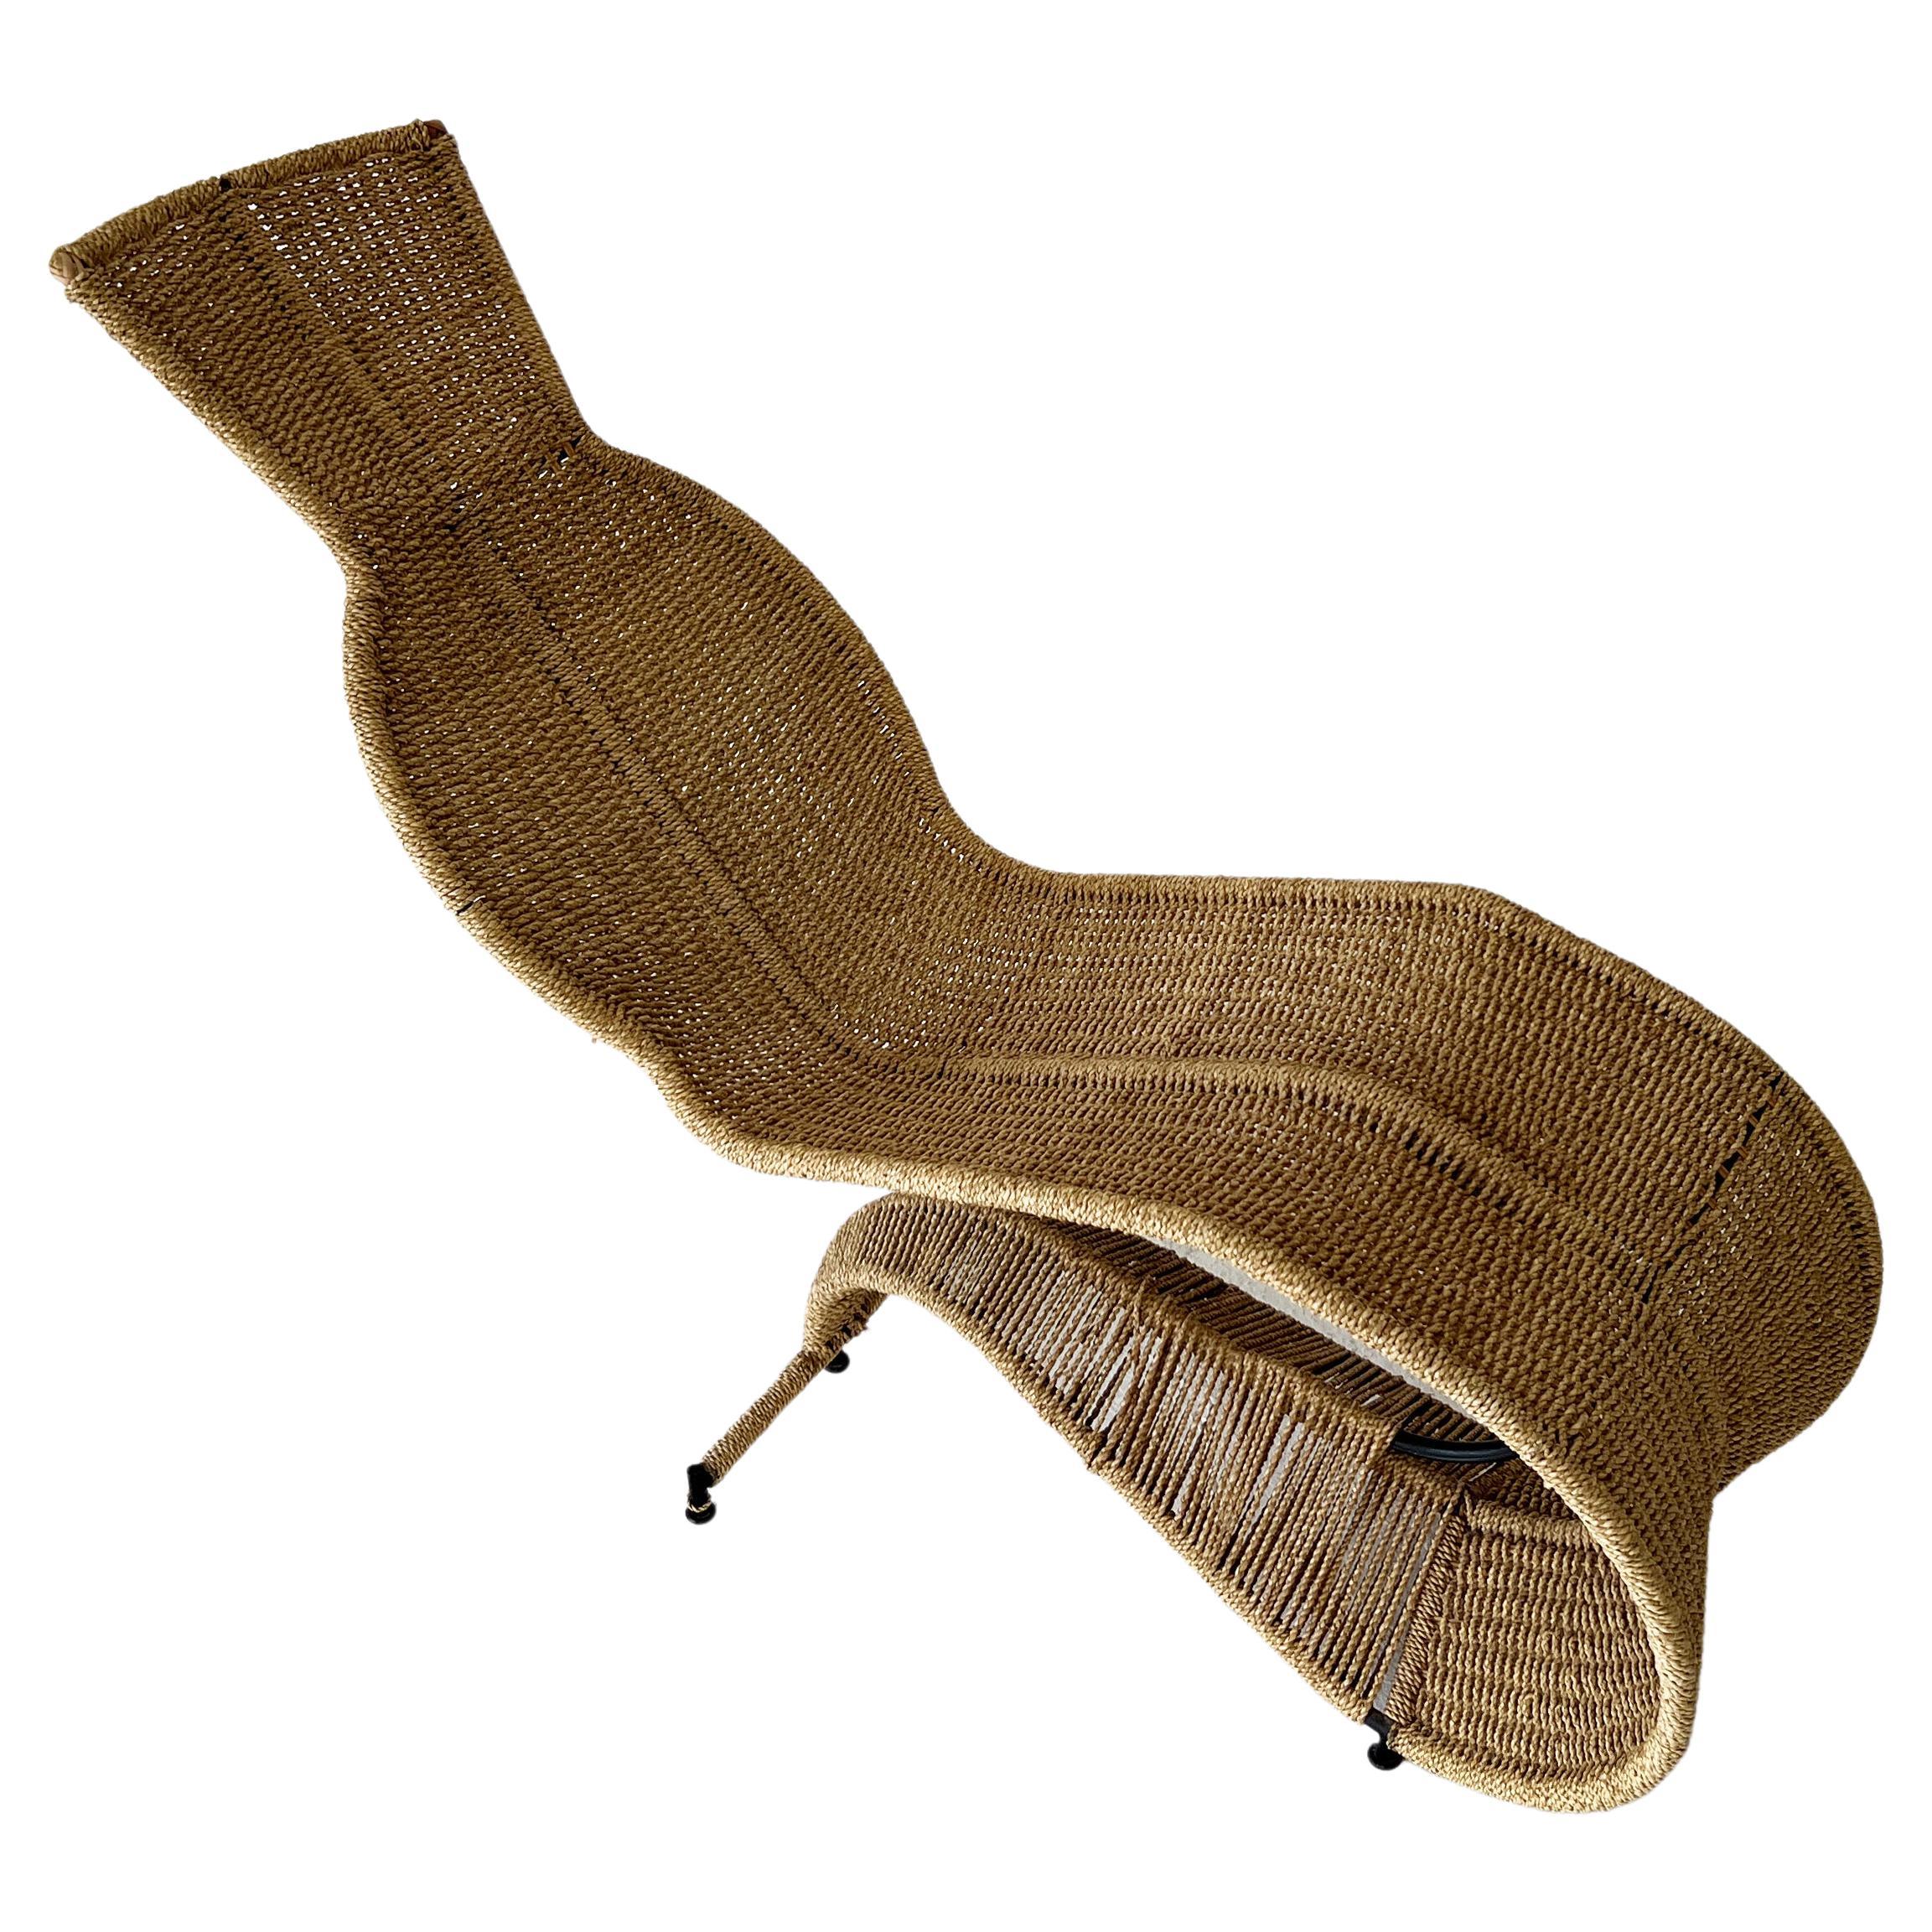 Tom Dixon 'Bolide' Woven Seagrass Chair, London, 1991 For Sale